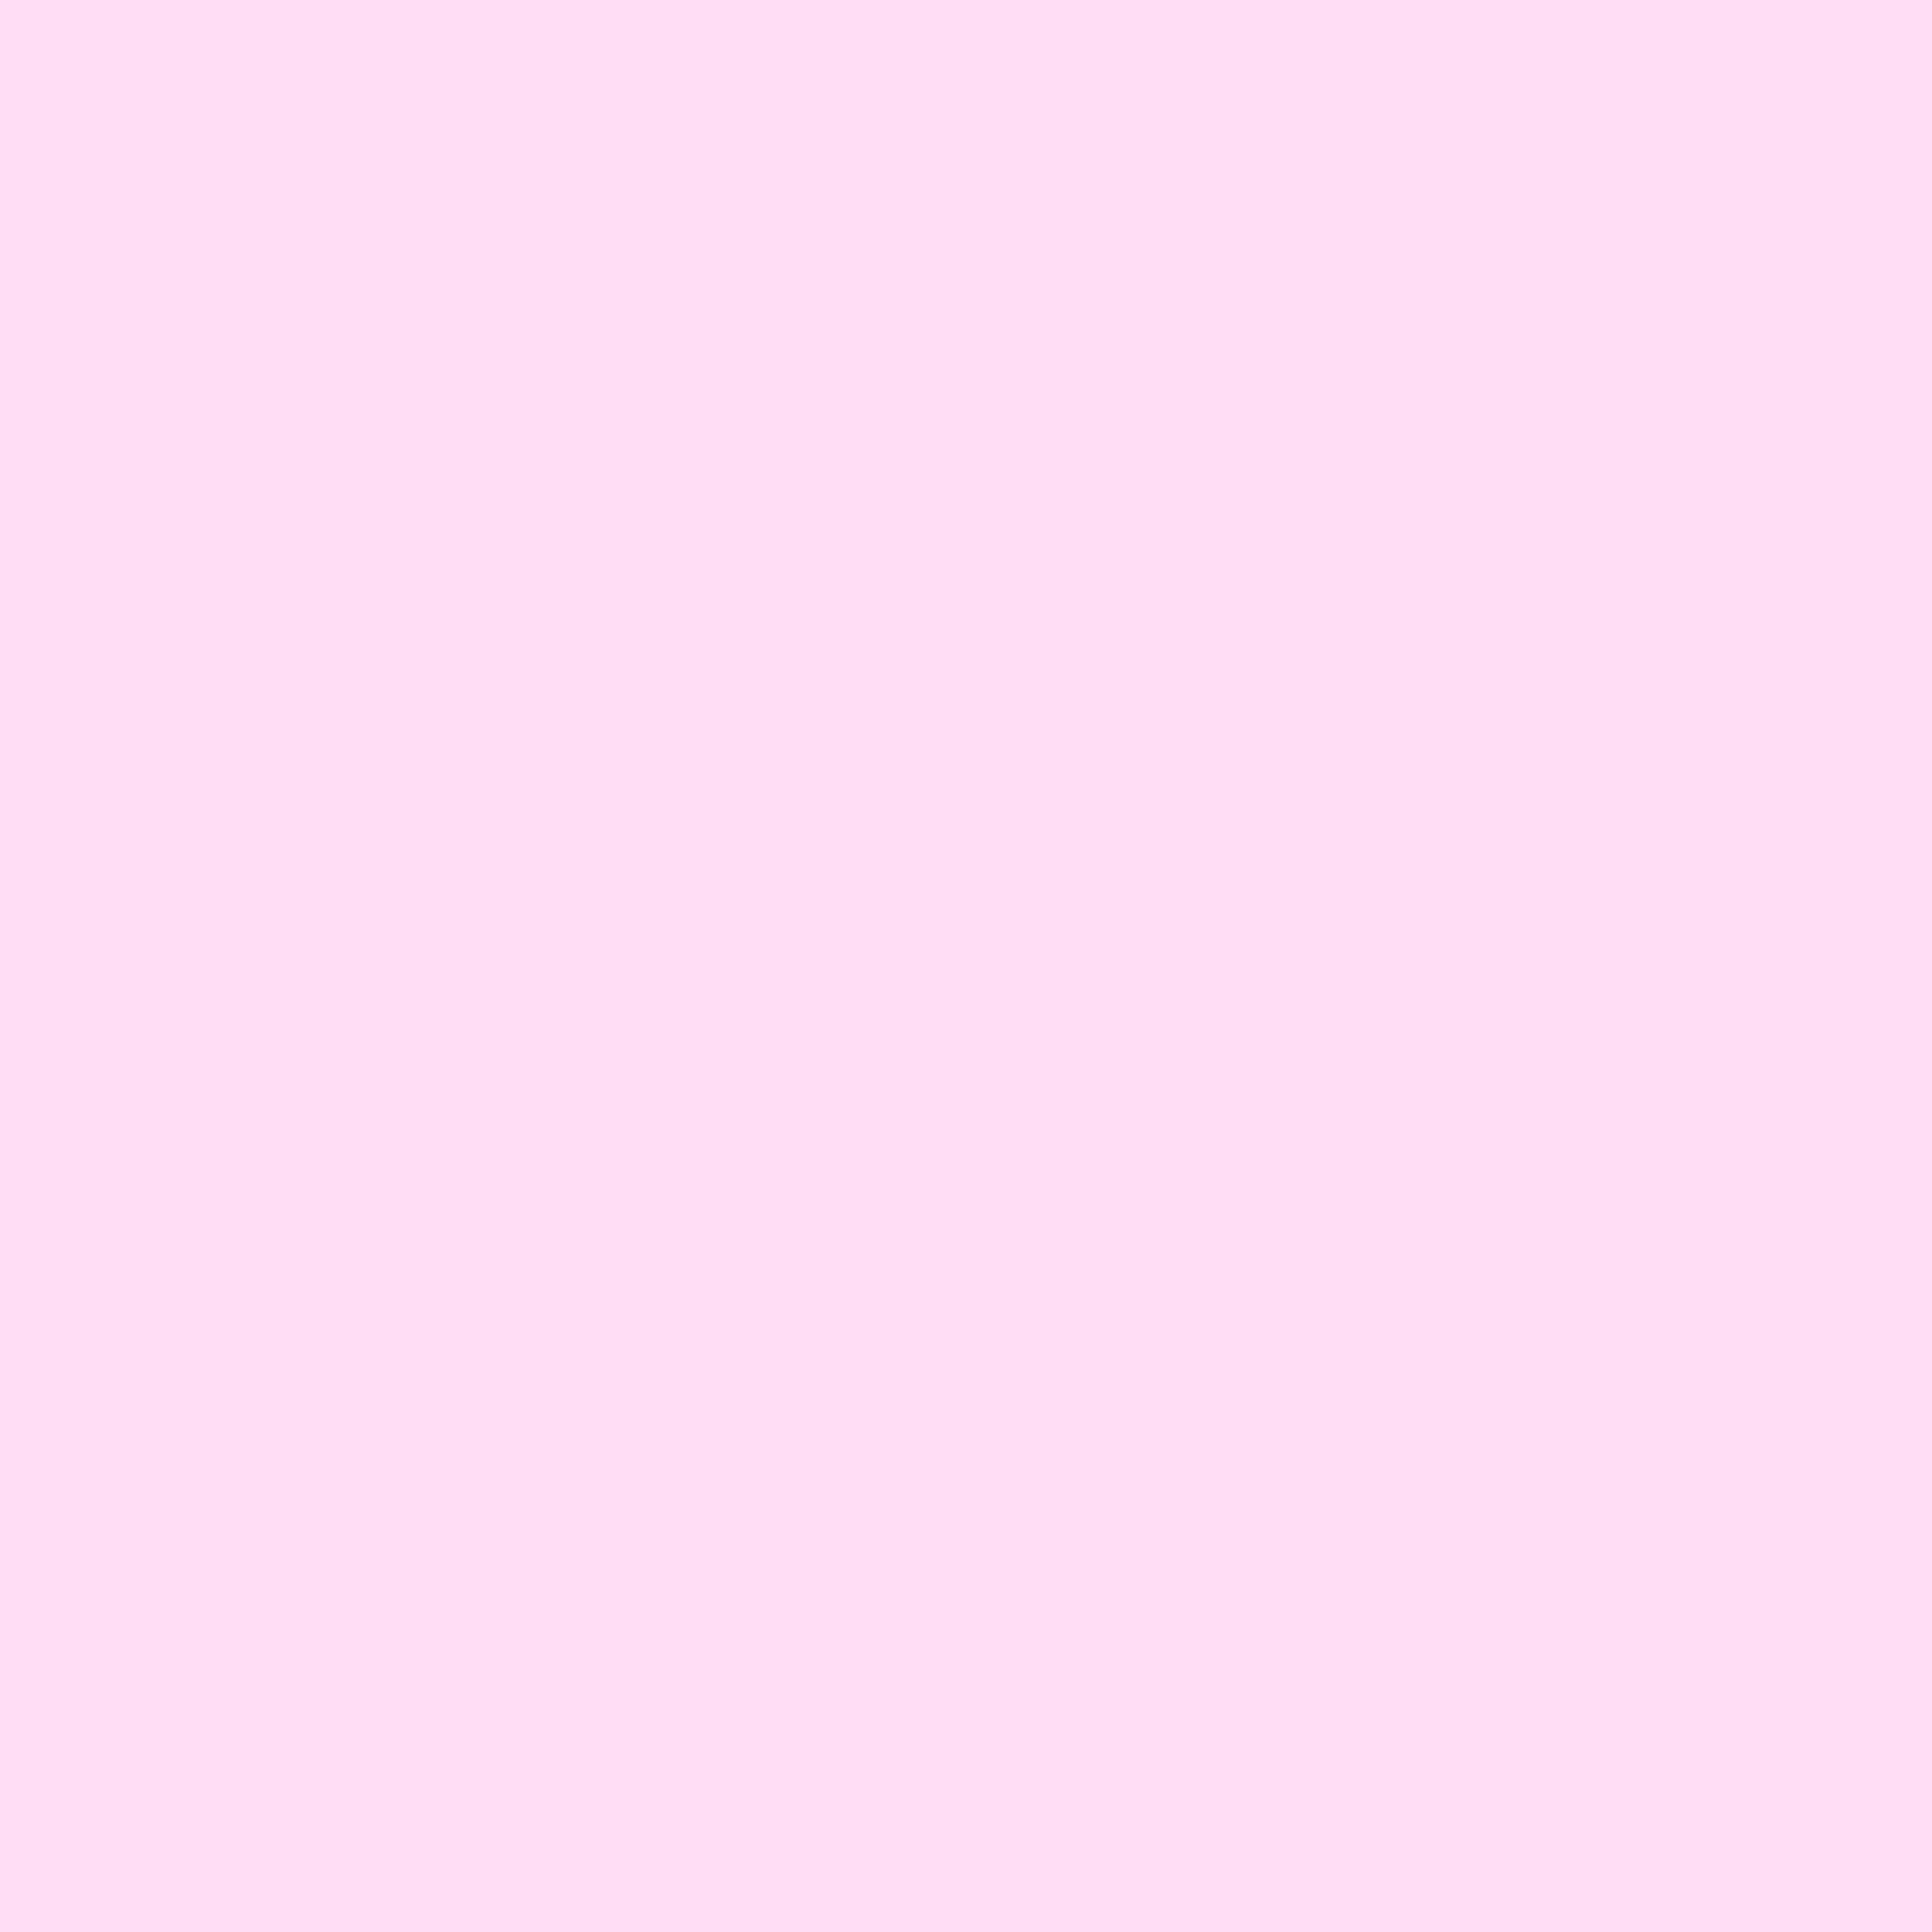 2732x2732 Pink Lace Solid Color Background